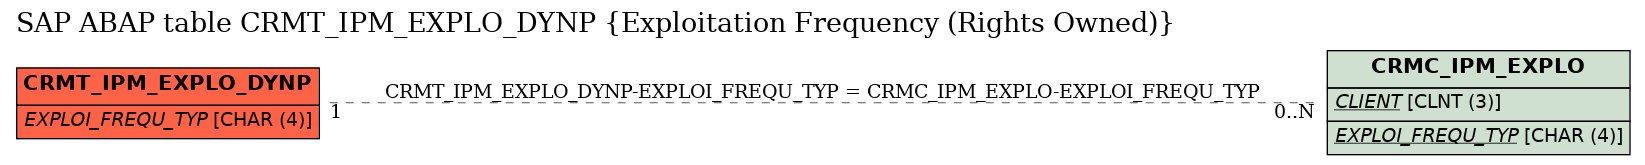 E-R Diagram for table CRMT_IPM_EXPLO_DYNP (Exploitation Frequency (Rights Owned))